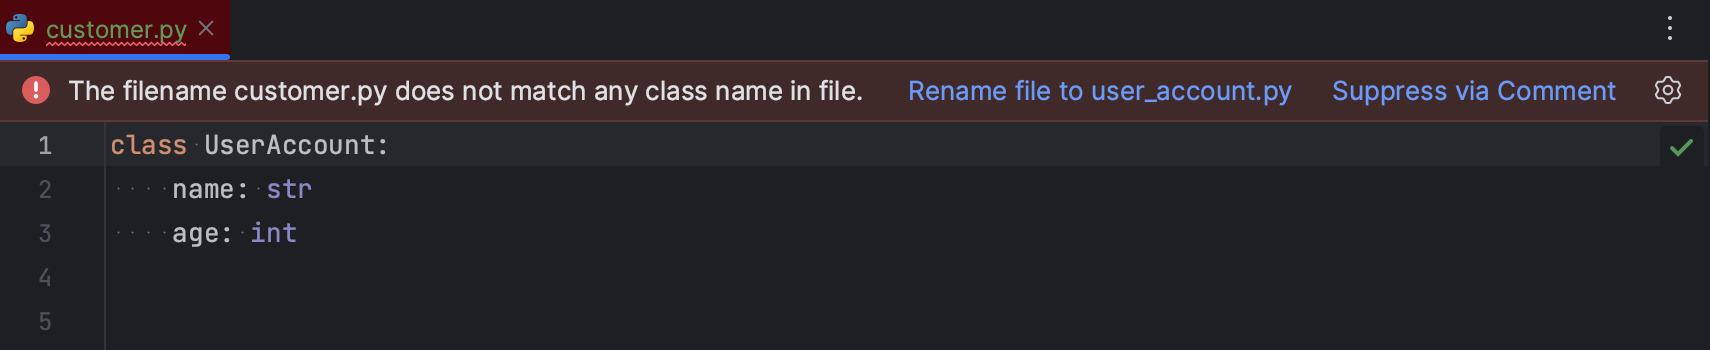 The Python OOP Companion is offering to rename the file "customer.py" to "user_account.py" to match the class name "UserAccount" within the file.